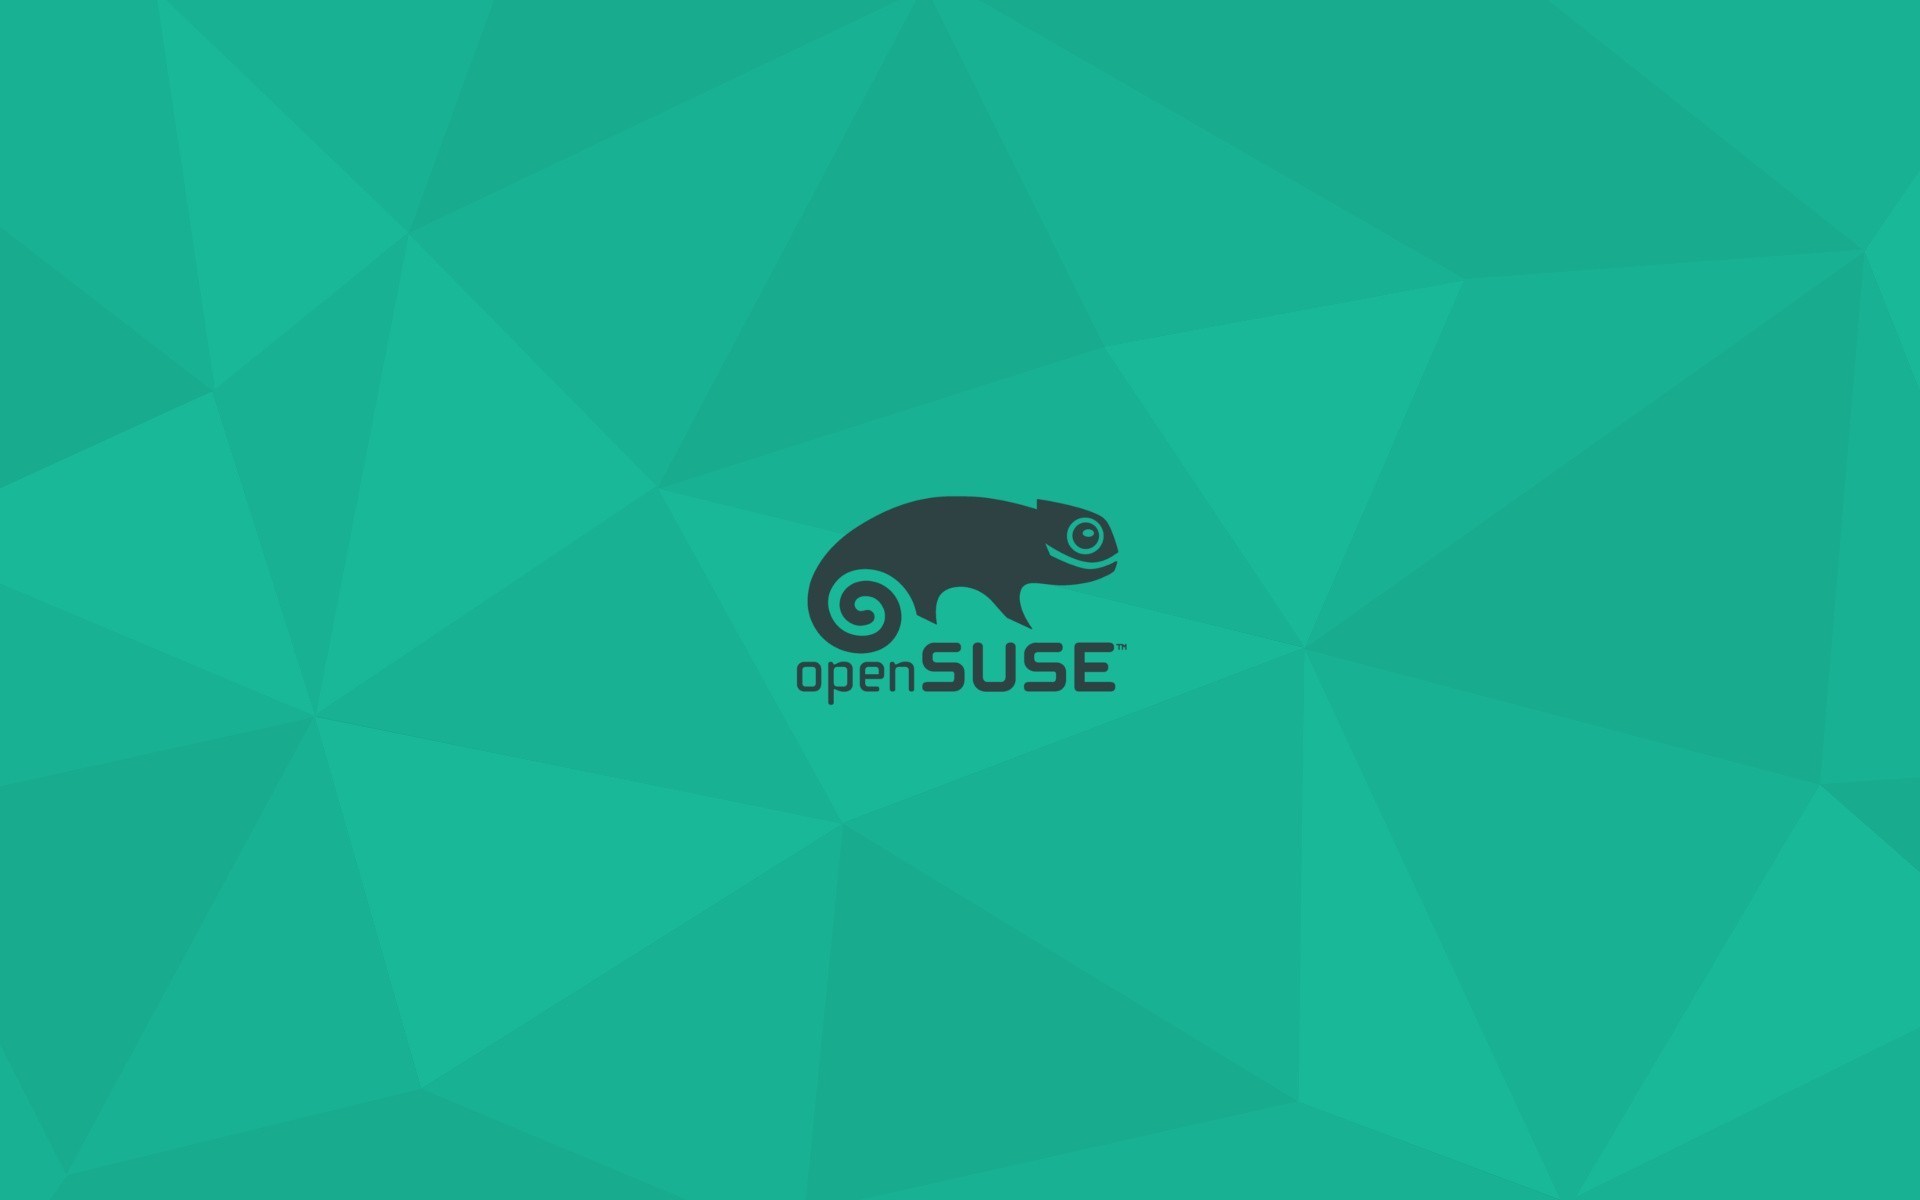 KYLIN SISTEMA OPERATIVO  Opensuse-leap-s-new-versioning-scheme-finally-syncs-with-suse-linux-enterprise-515158-2